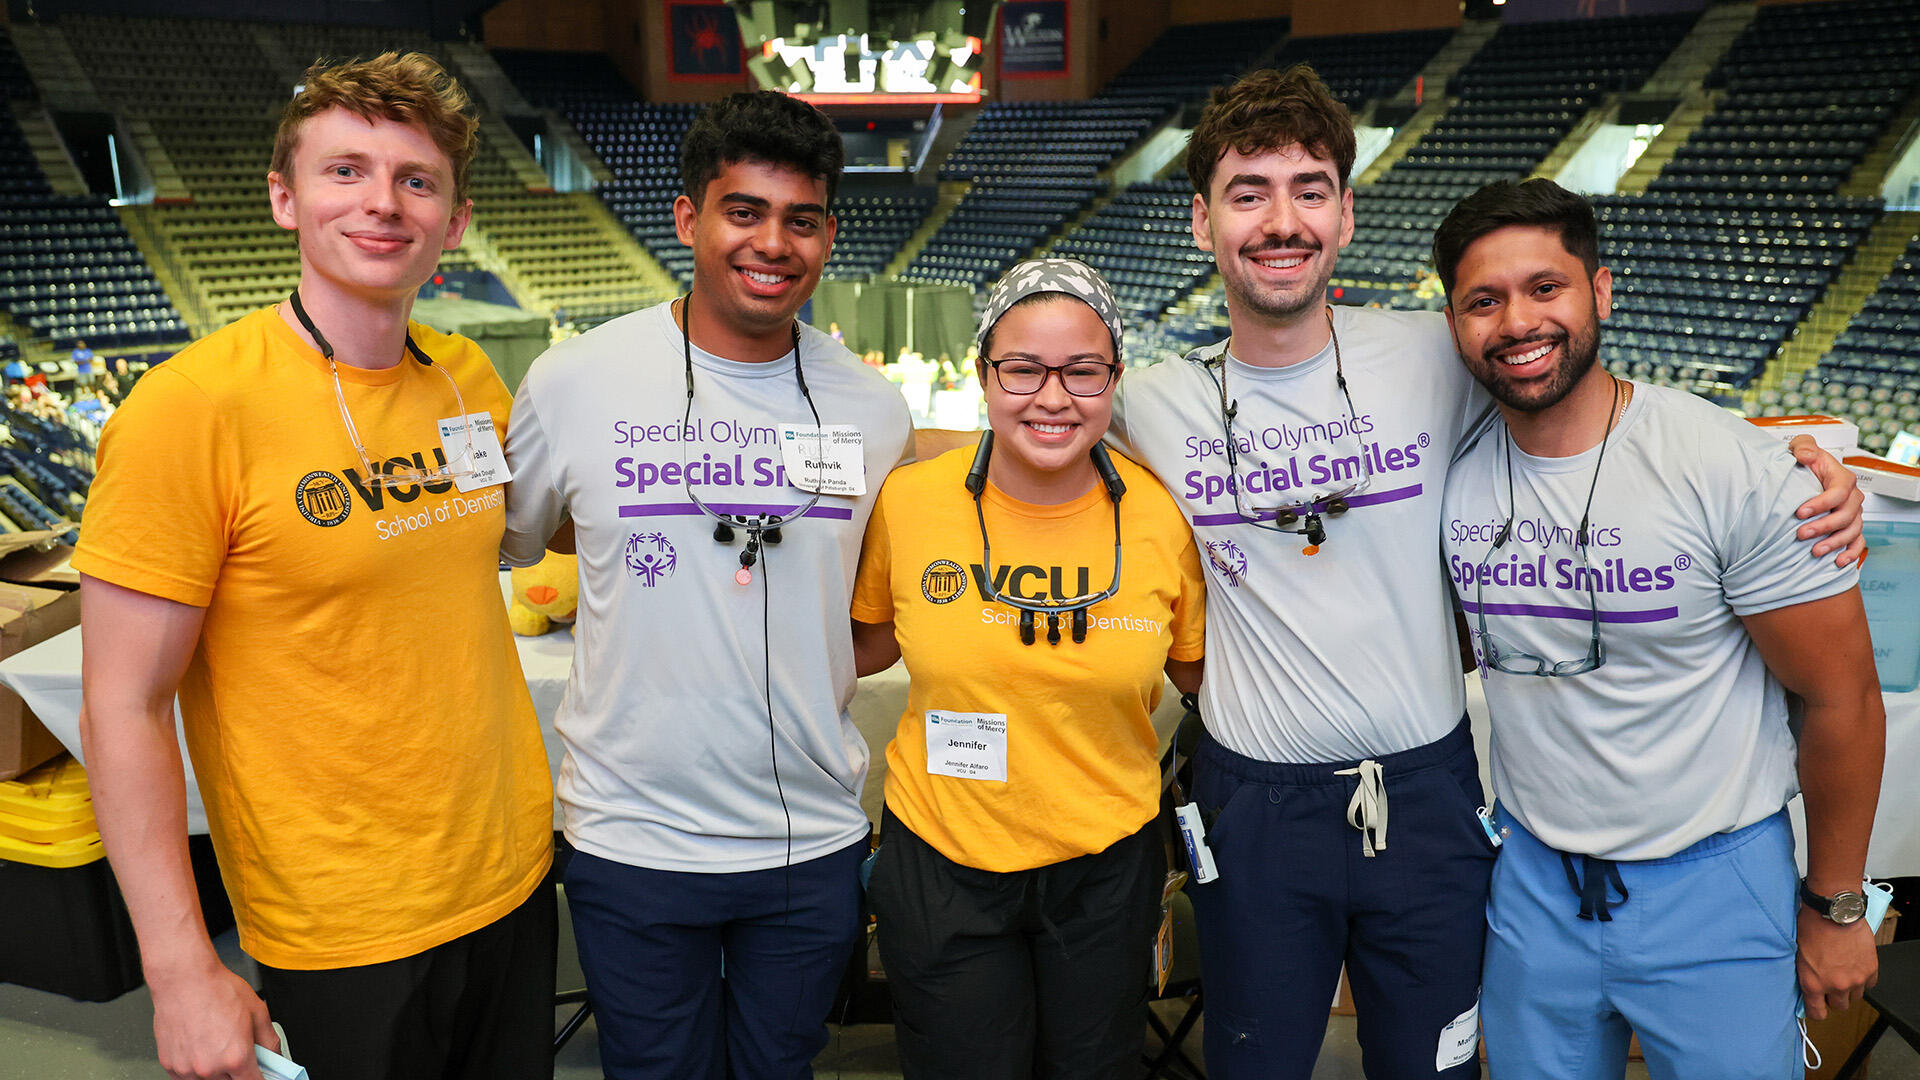 A group photo of five people standing in a row with their arms behind each other's backs. The person on the far left and the person in the middle are wearing yellow t-shirts that say \"VCU School of Dentistry\" in black and white text. The other three people are wearing gray sweatshirts that say \"Special Olympics Special Smiles\" in purple text. 